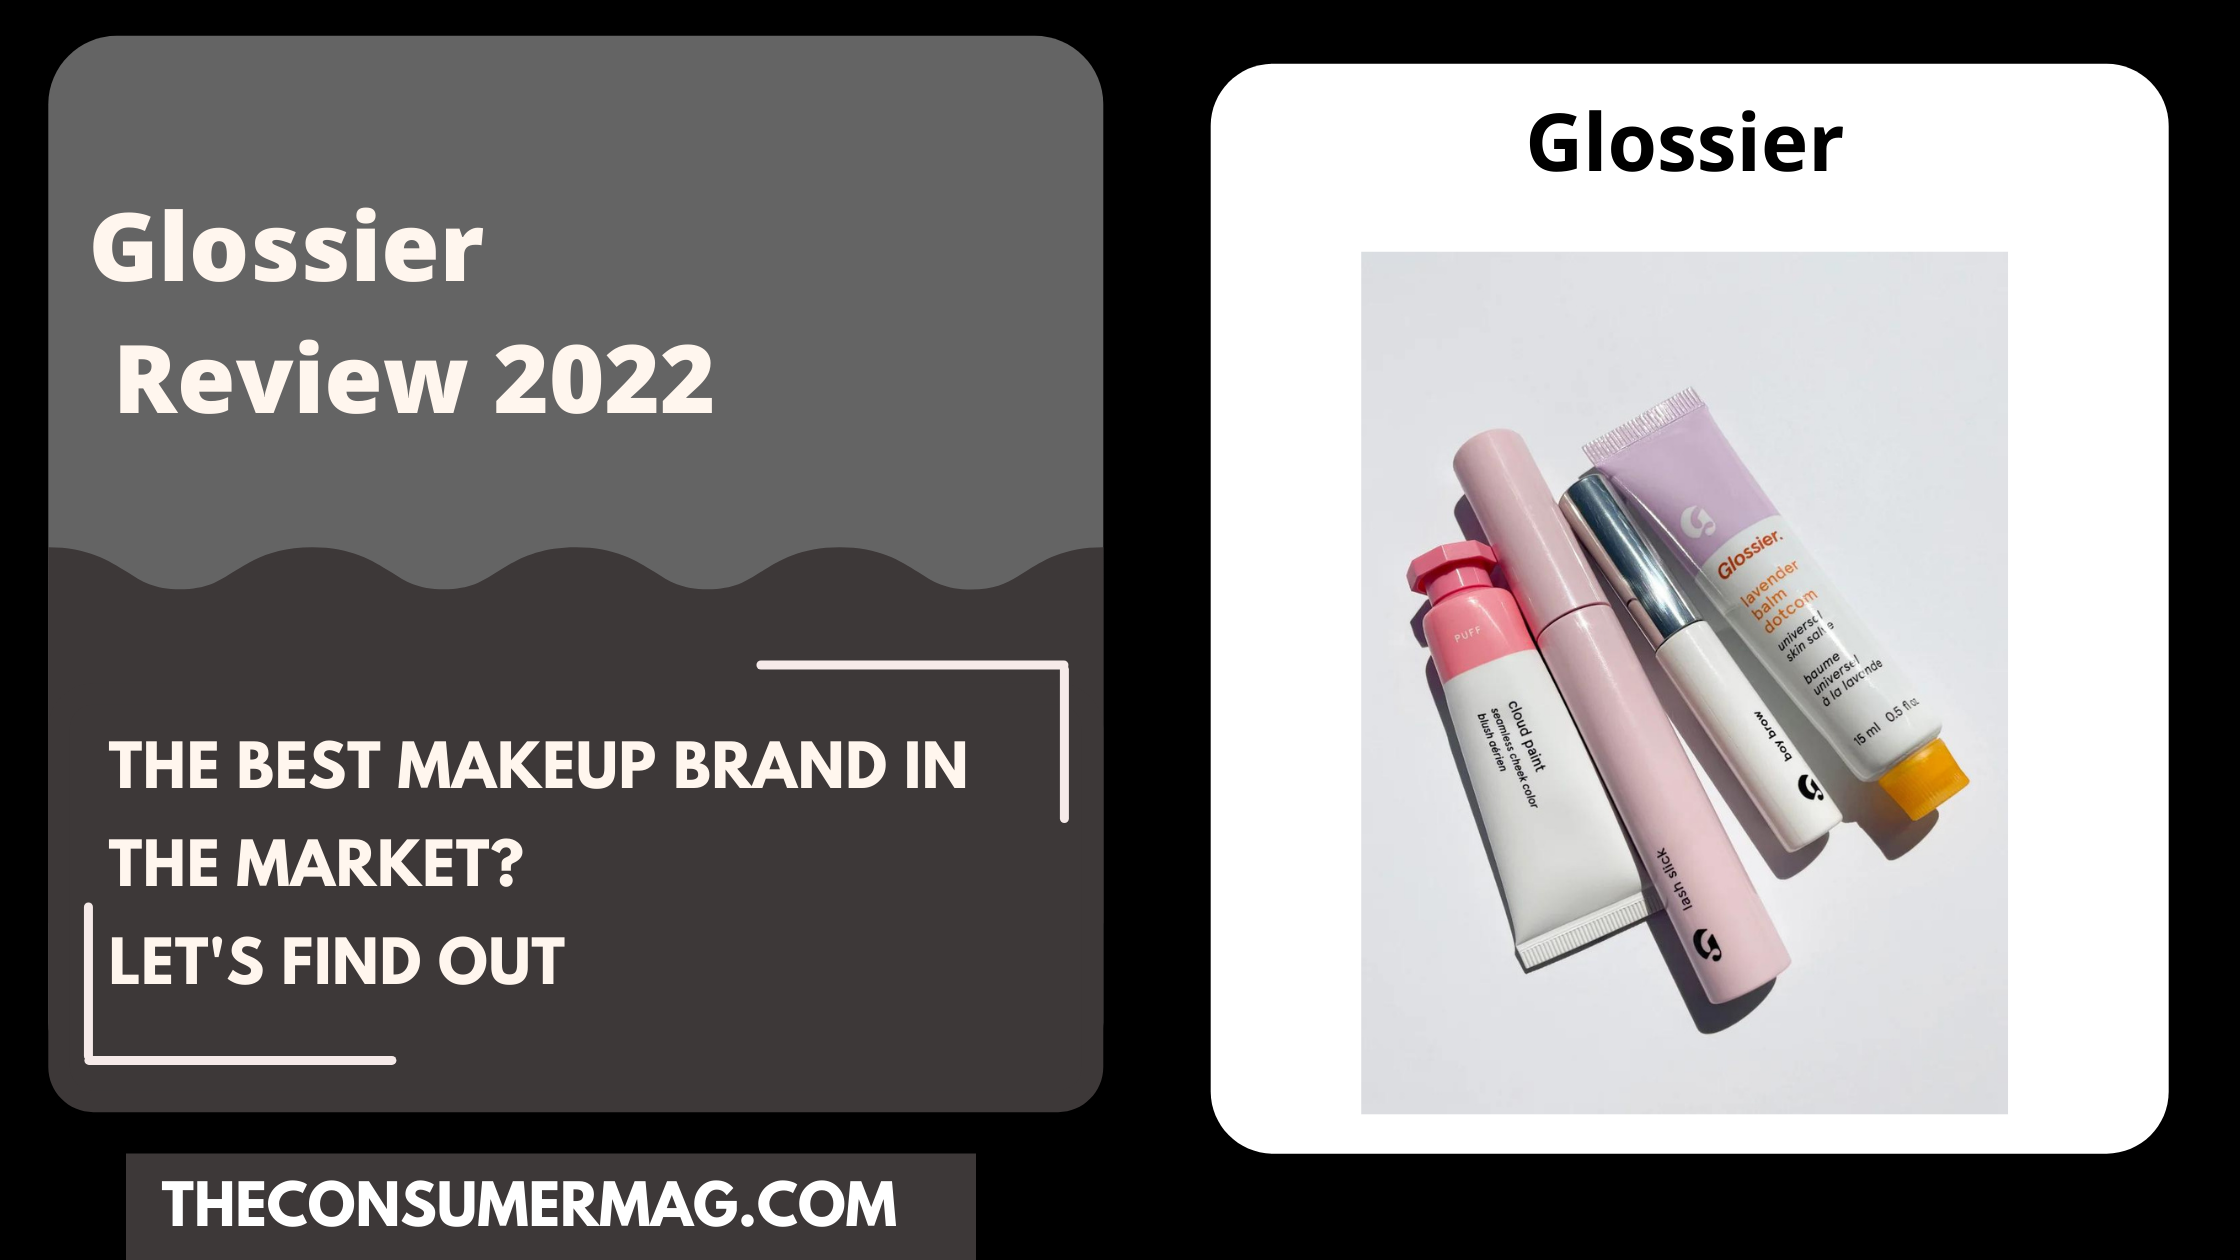 Glossier Featured Image